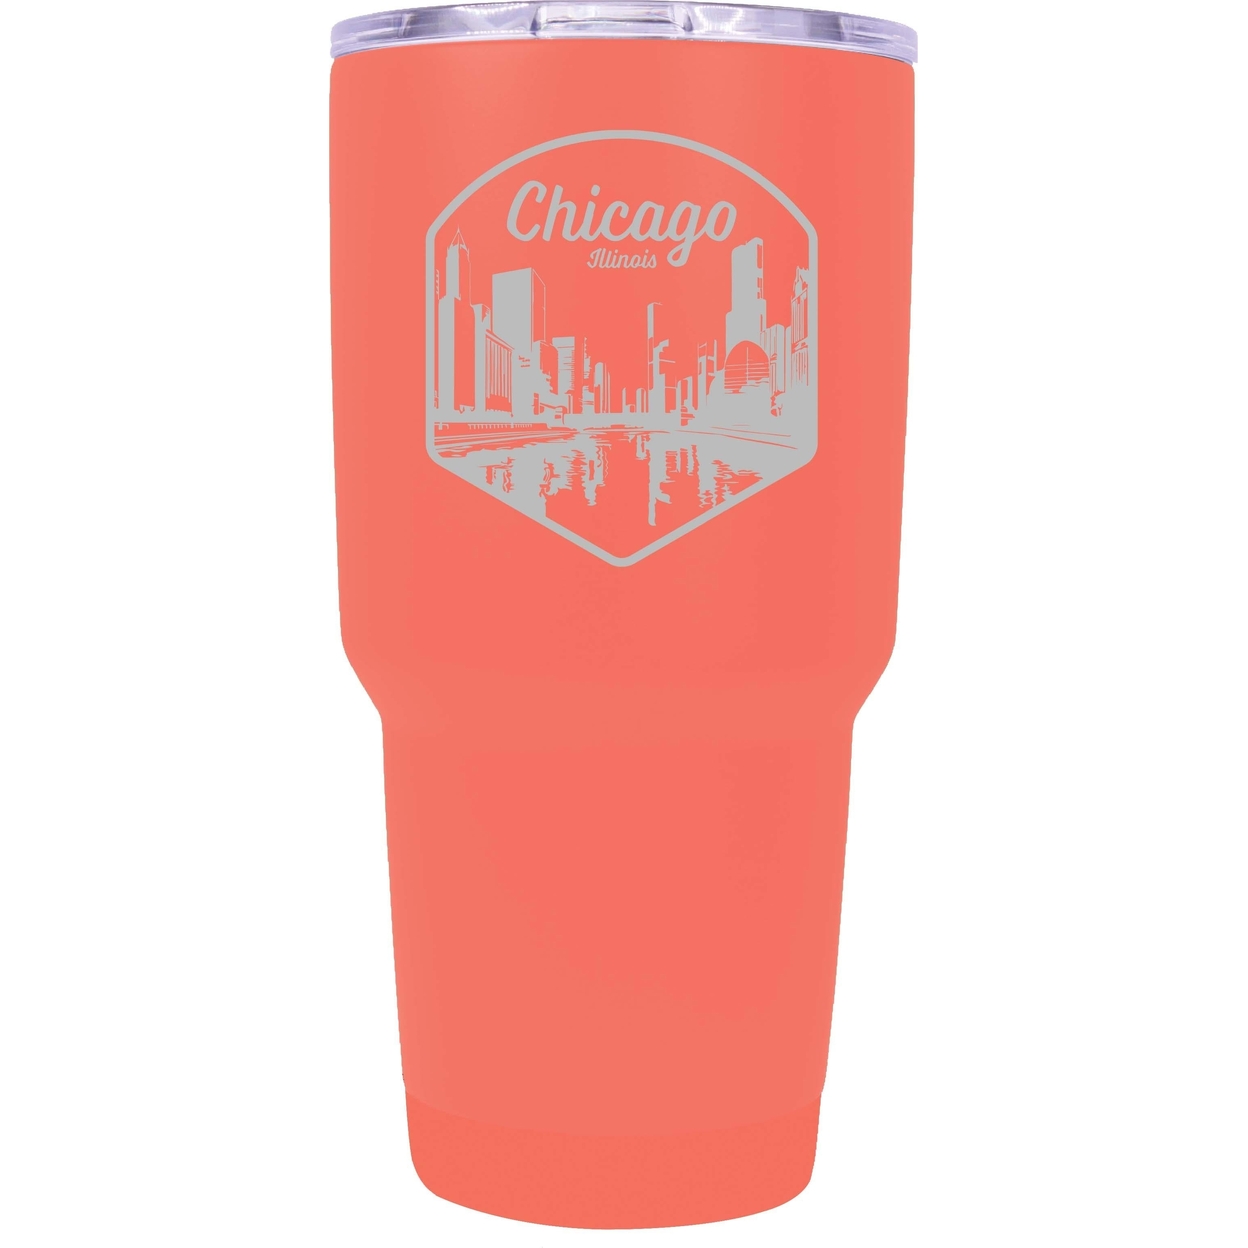 Chicago Illinois Souvenir 24 Oz Engraved Insulated Tumbler - Coral,,2-Pack